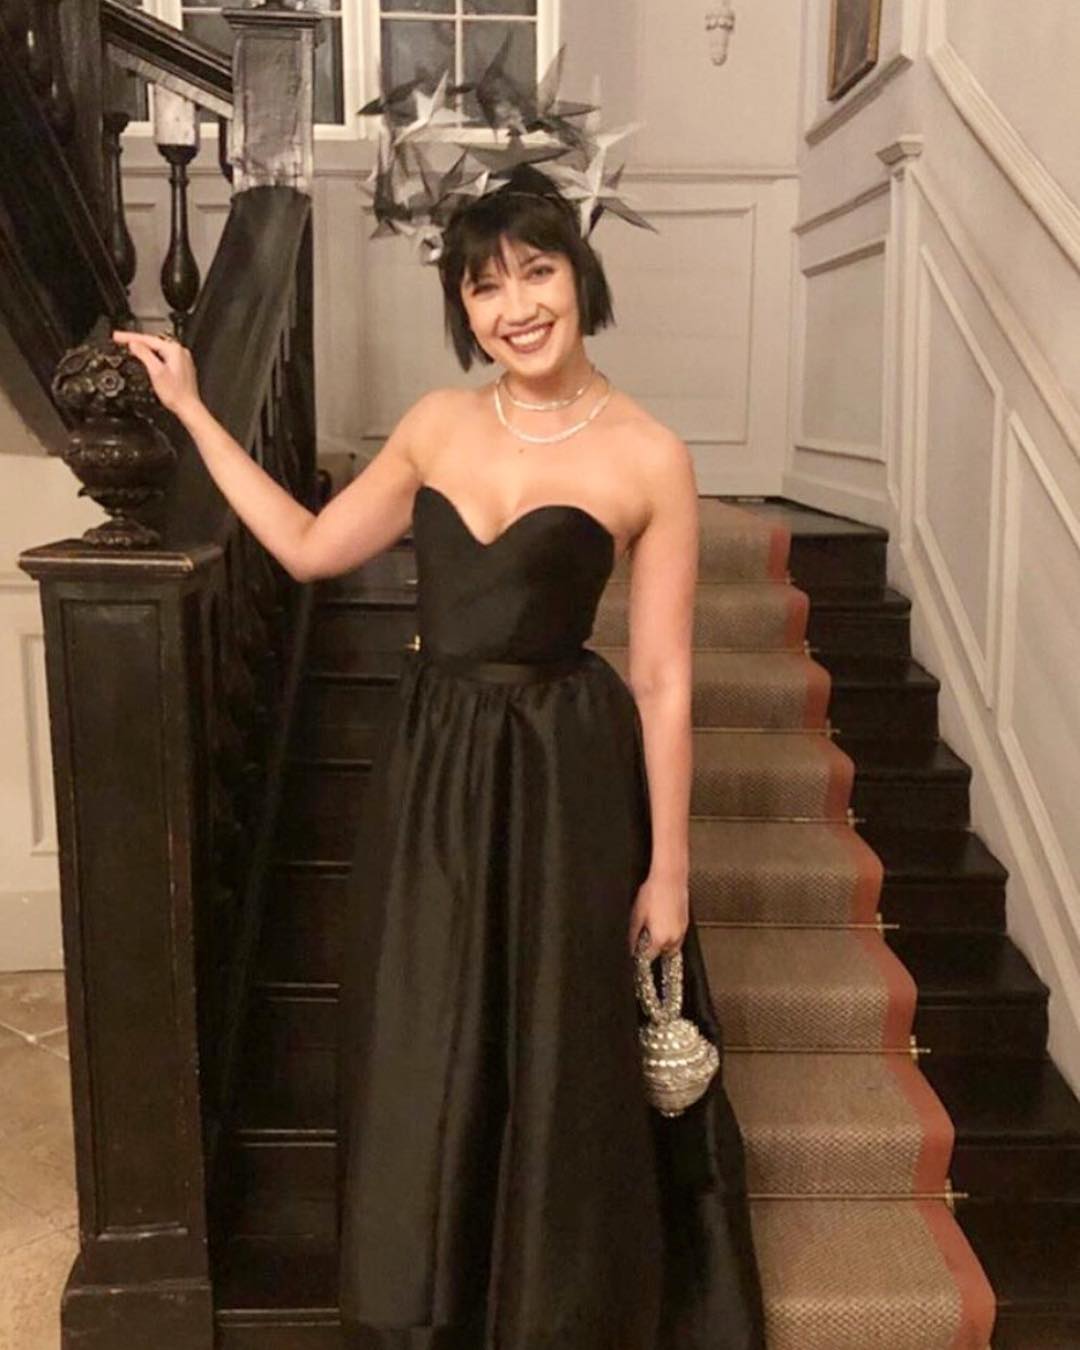 Daisy Lowe birthday weekend The Pig Hotel Silver Simi Sparkle clutch bag sparkly UK Awon Golding headpiece Halfpenny gown Styled by Avigail Collins black dress LBD gown black tie red carpet fashion style